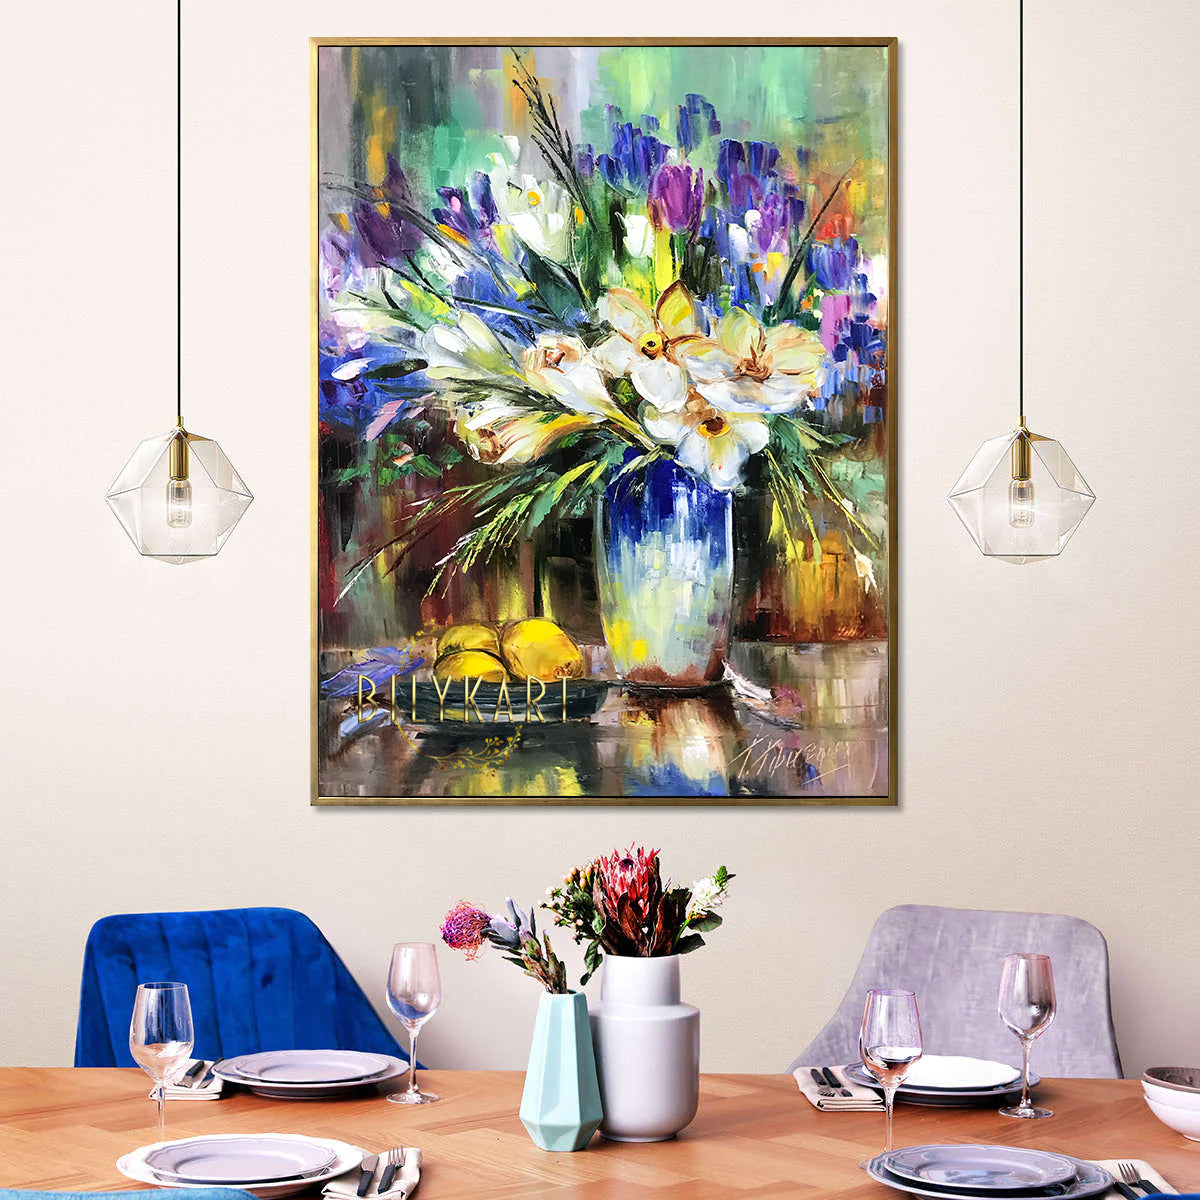 Large Flowers Oil Painting Original Abstract Floral Wall Art Classic Flower Art Flowers Bouquet in Vase Abstract Flower Still Life Painting on Canvas